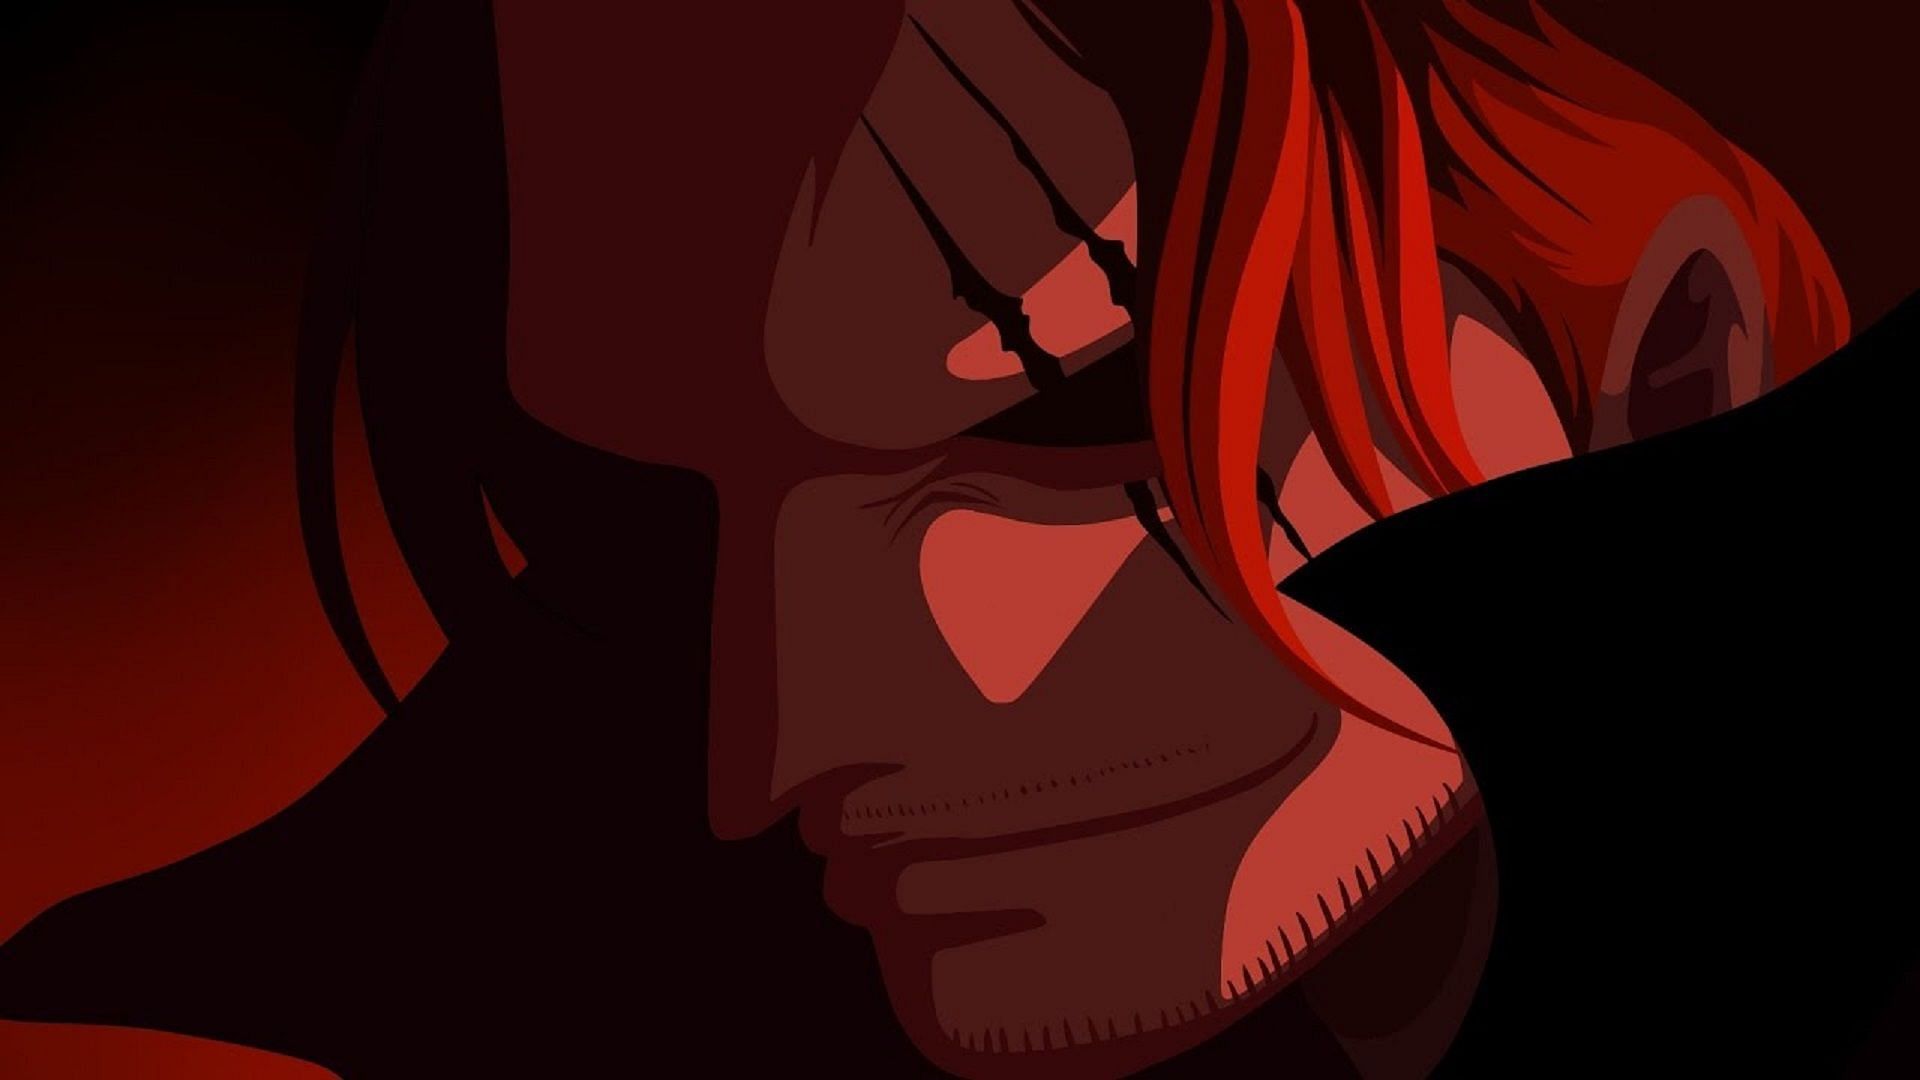 Some One Piece fans find Shanks an overrated character (Image via Toei Animation, One Piece)